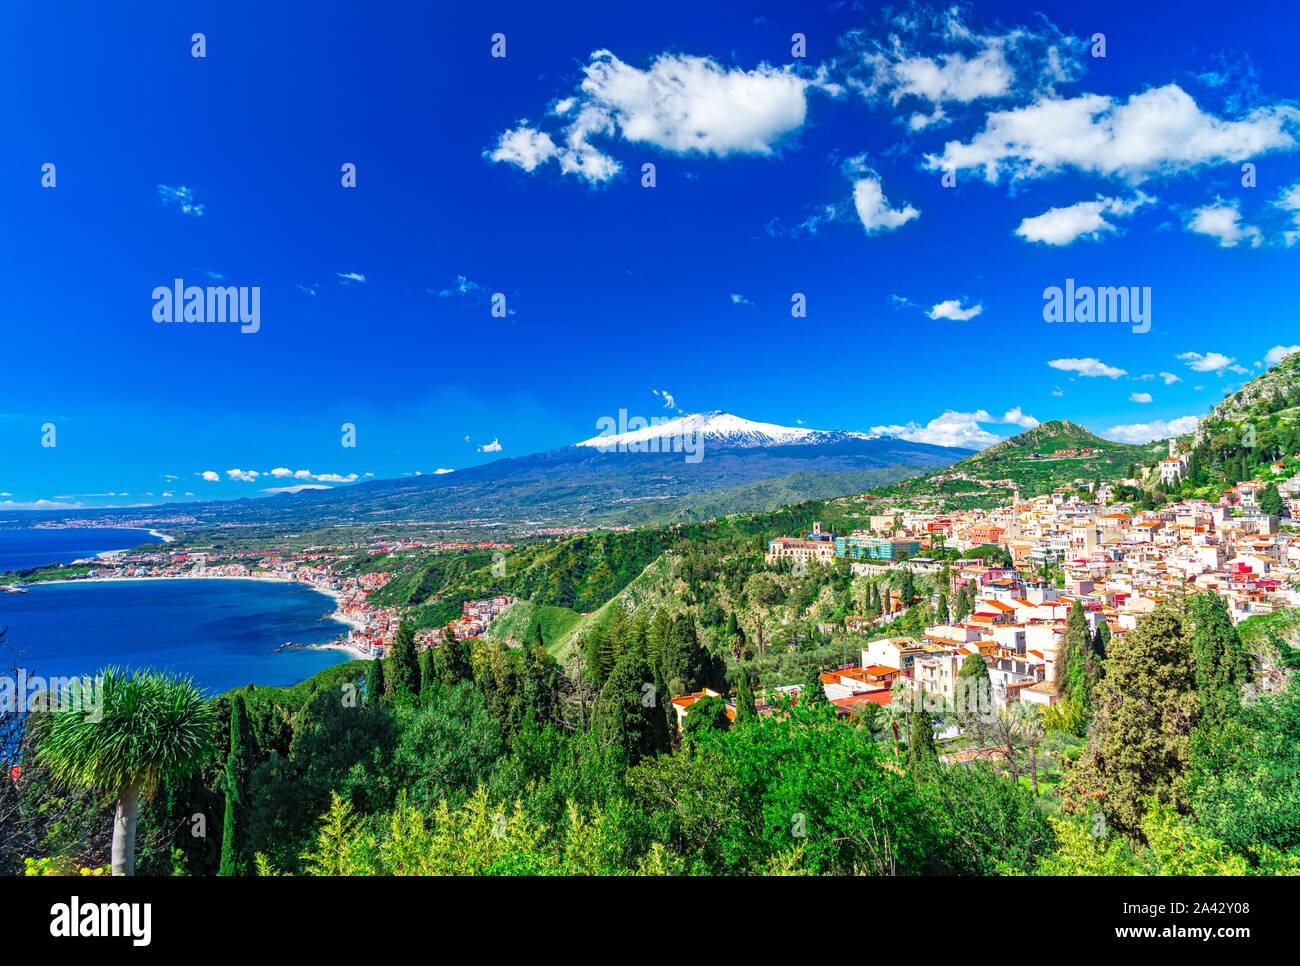 Taormina, Sicily, Italy: Panoramic view from the top of the Greek Theater,  Giardini-Naxos  with the Etna and Taormina, in a beautiful day. Stock Photo